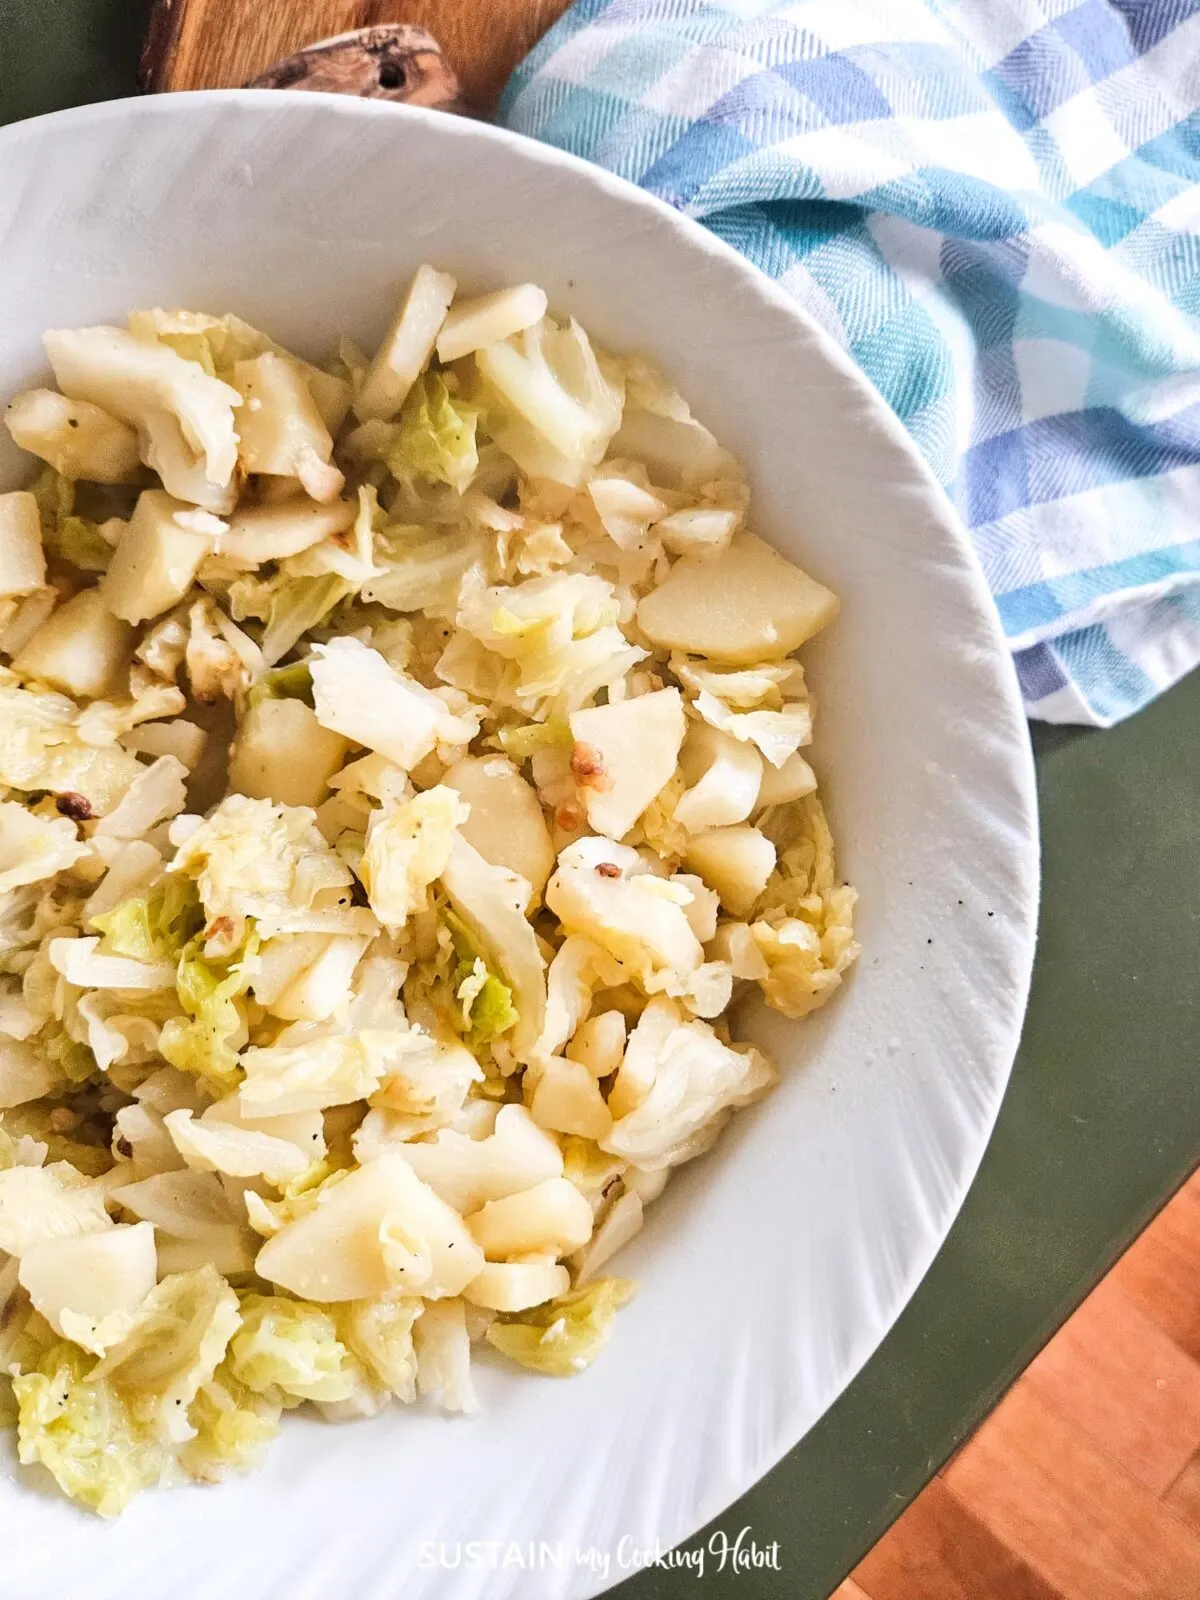 Cooked savoy cabbage and potato side dish in a bowl.